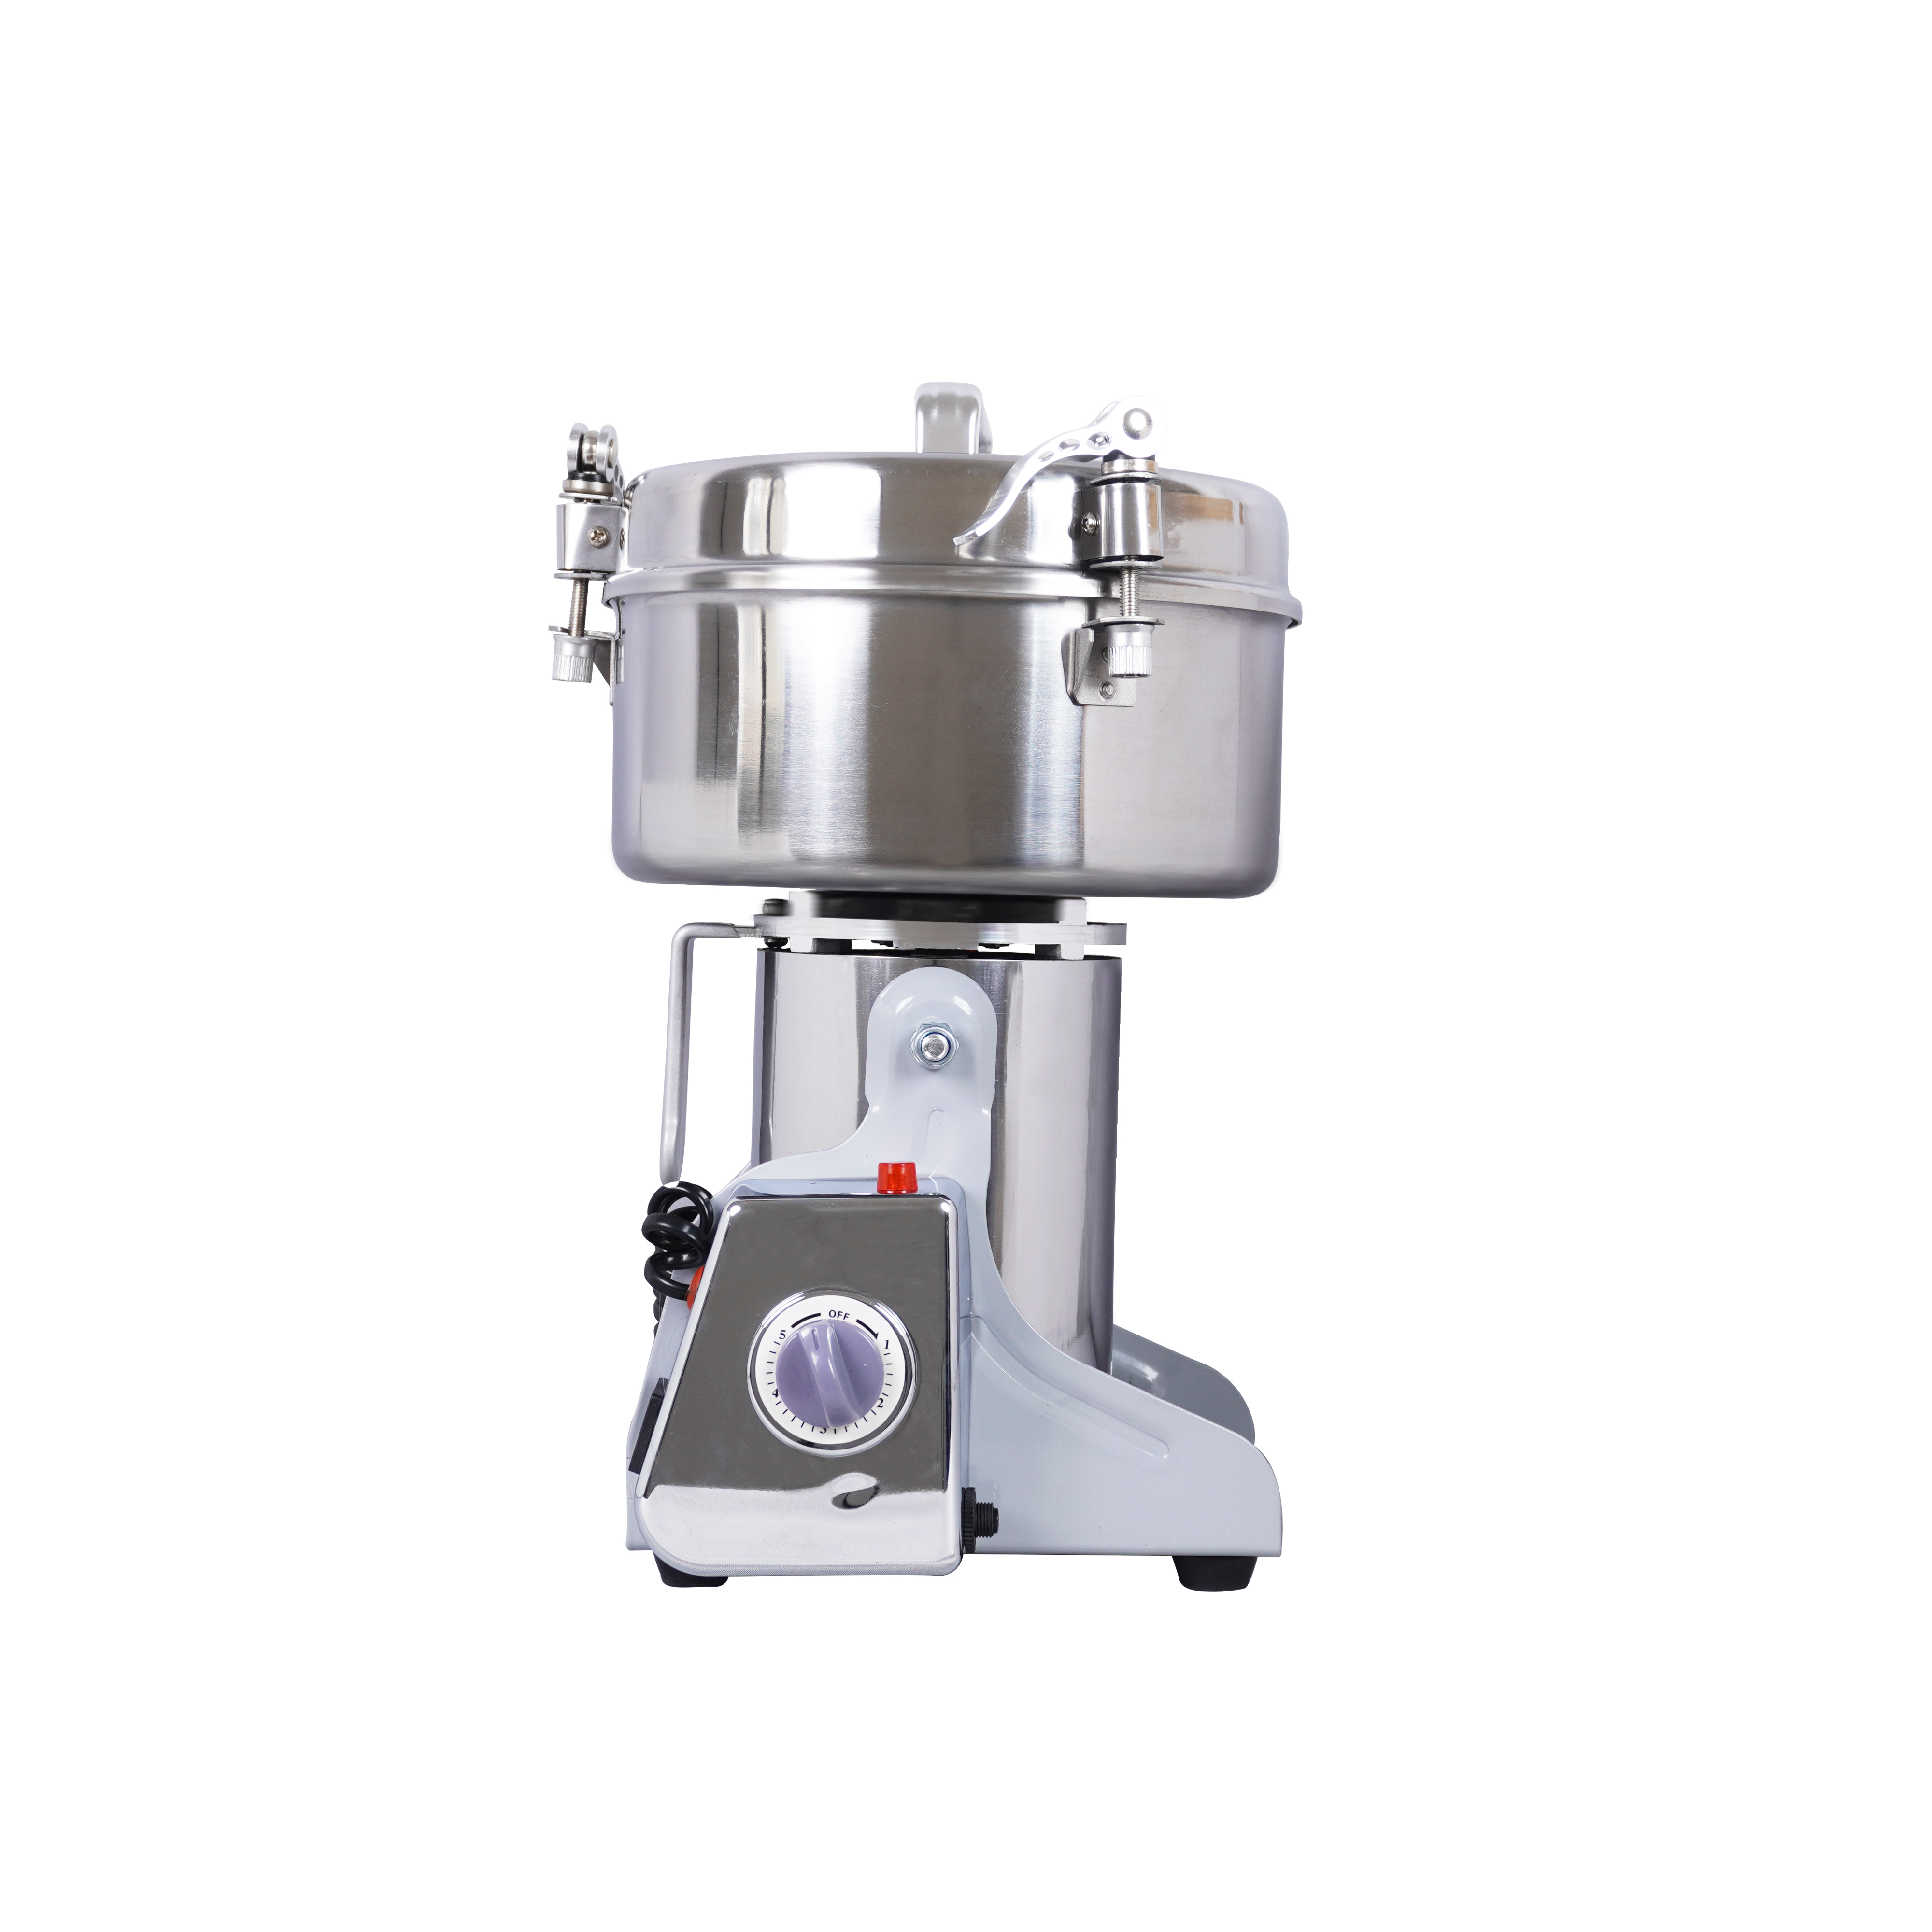 IMPERIUM Stainless Steel Portable Spice Grinder Machine For Home Use